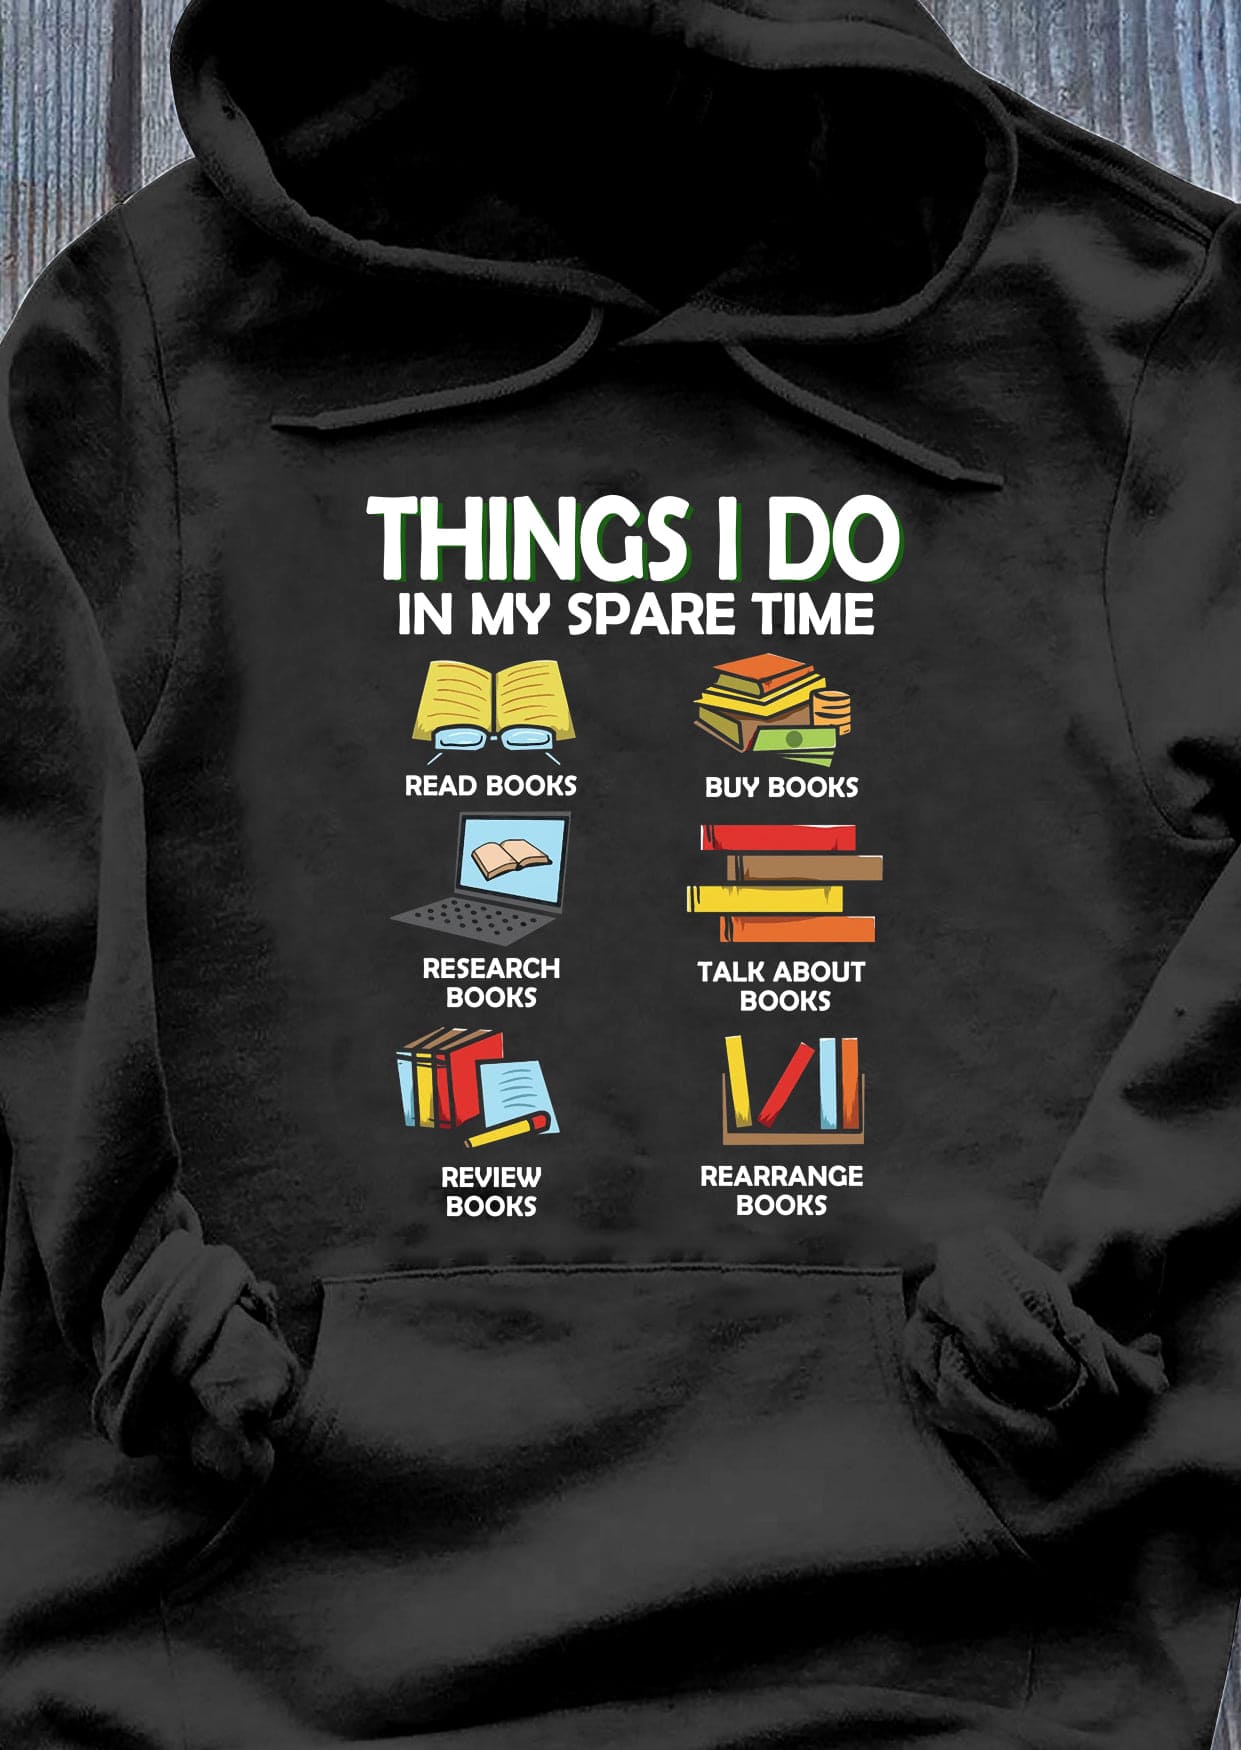 Things I do in my spare time - Read books, buy books, talk about books, reviews books, book reader T-shirt